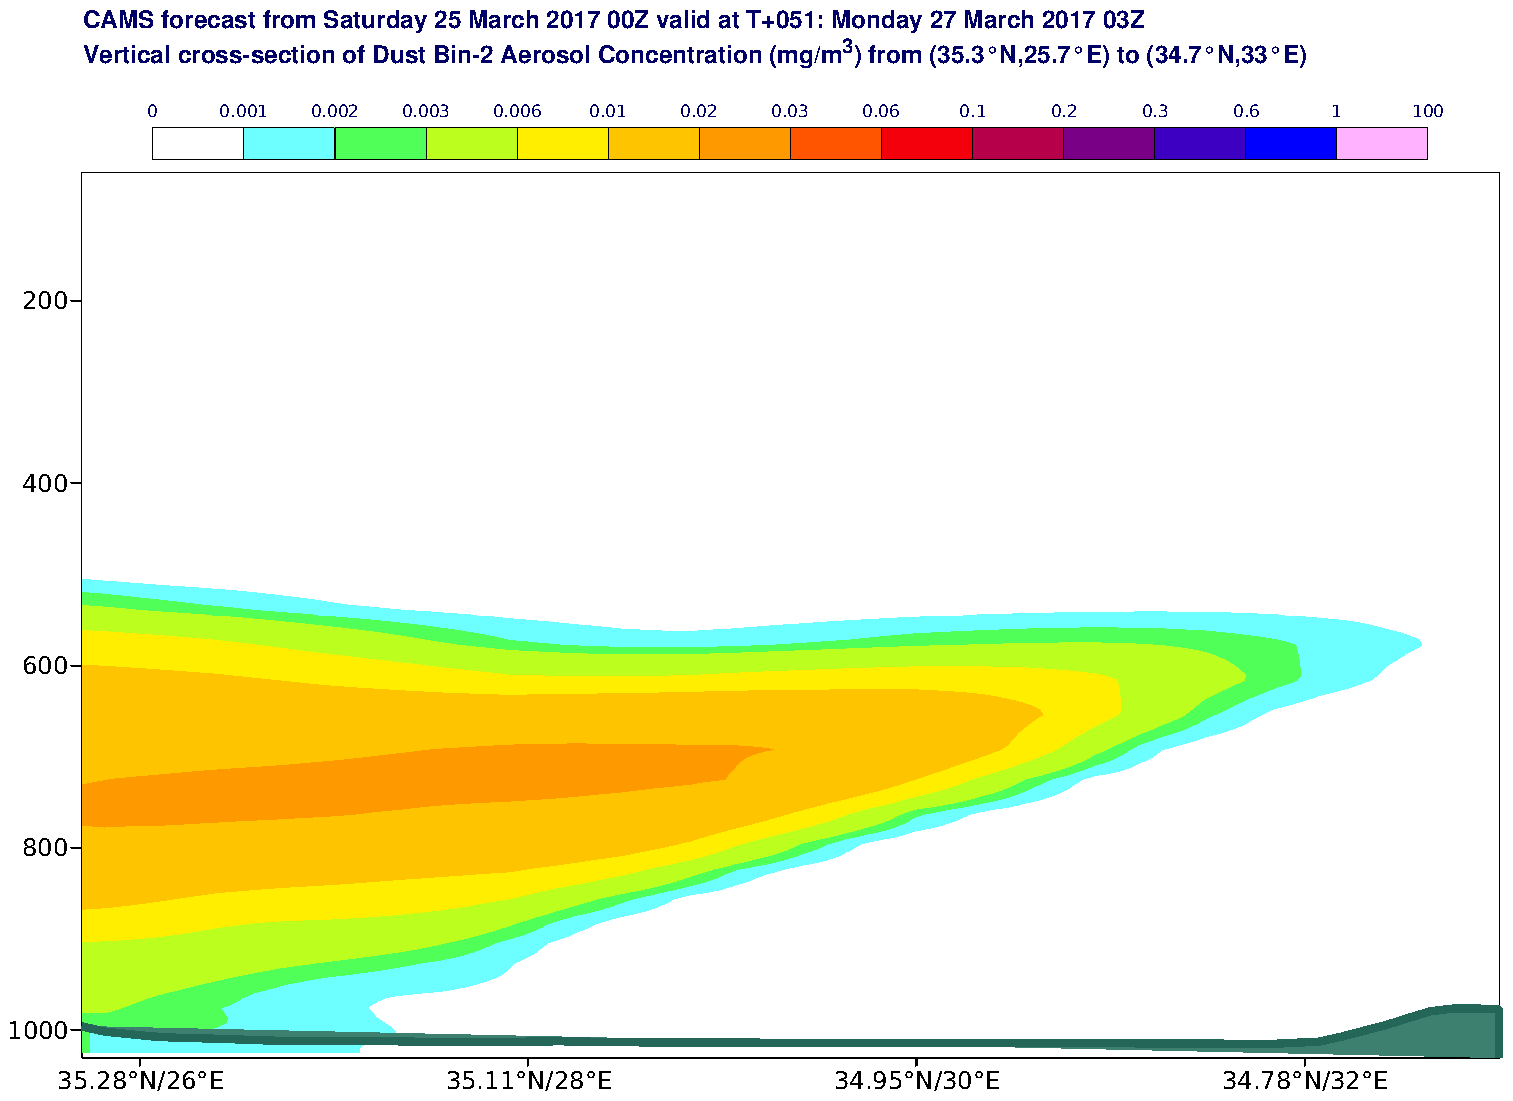 Vertical cross-section of Dust Bin-2 Aerosol Concentration (mg/m3) valid at T51 - 2017-03-27 03:00